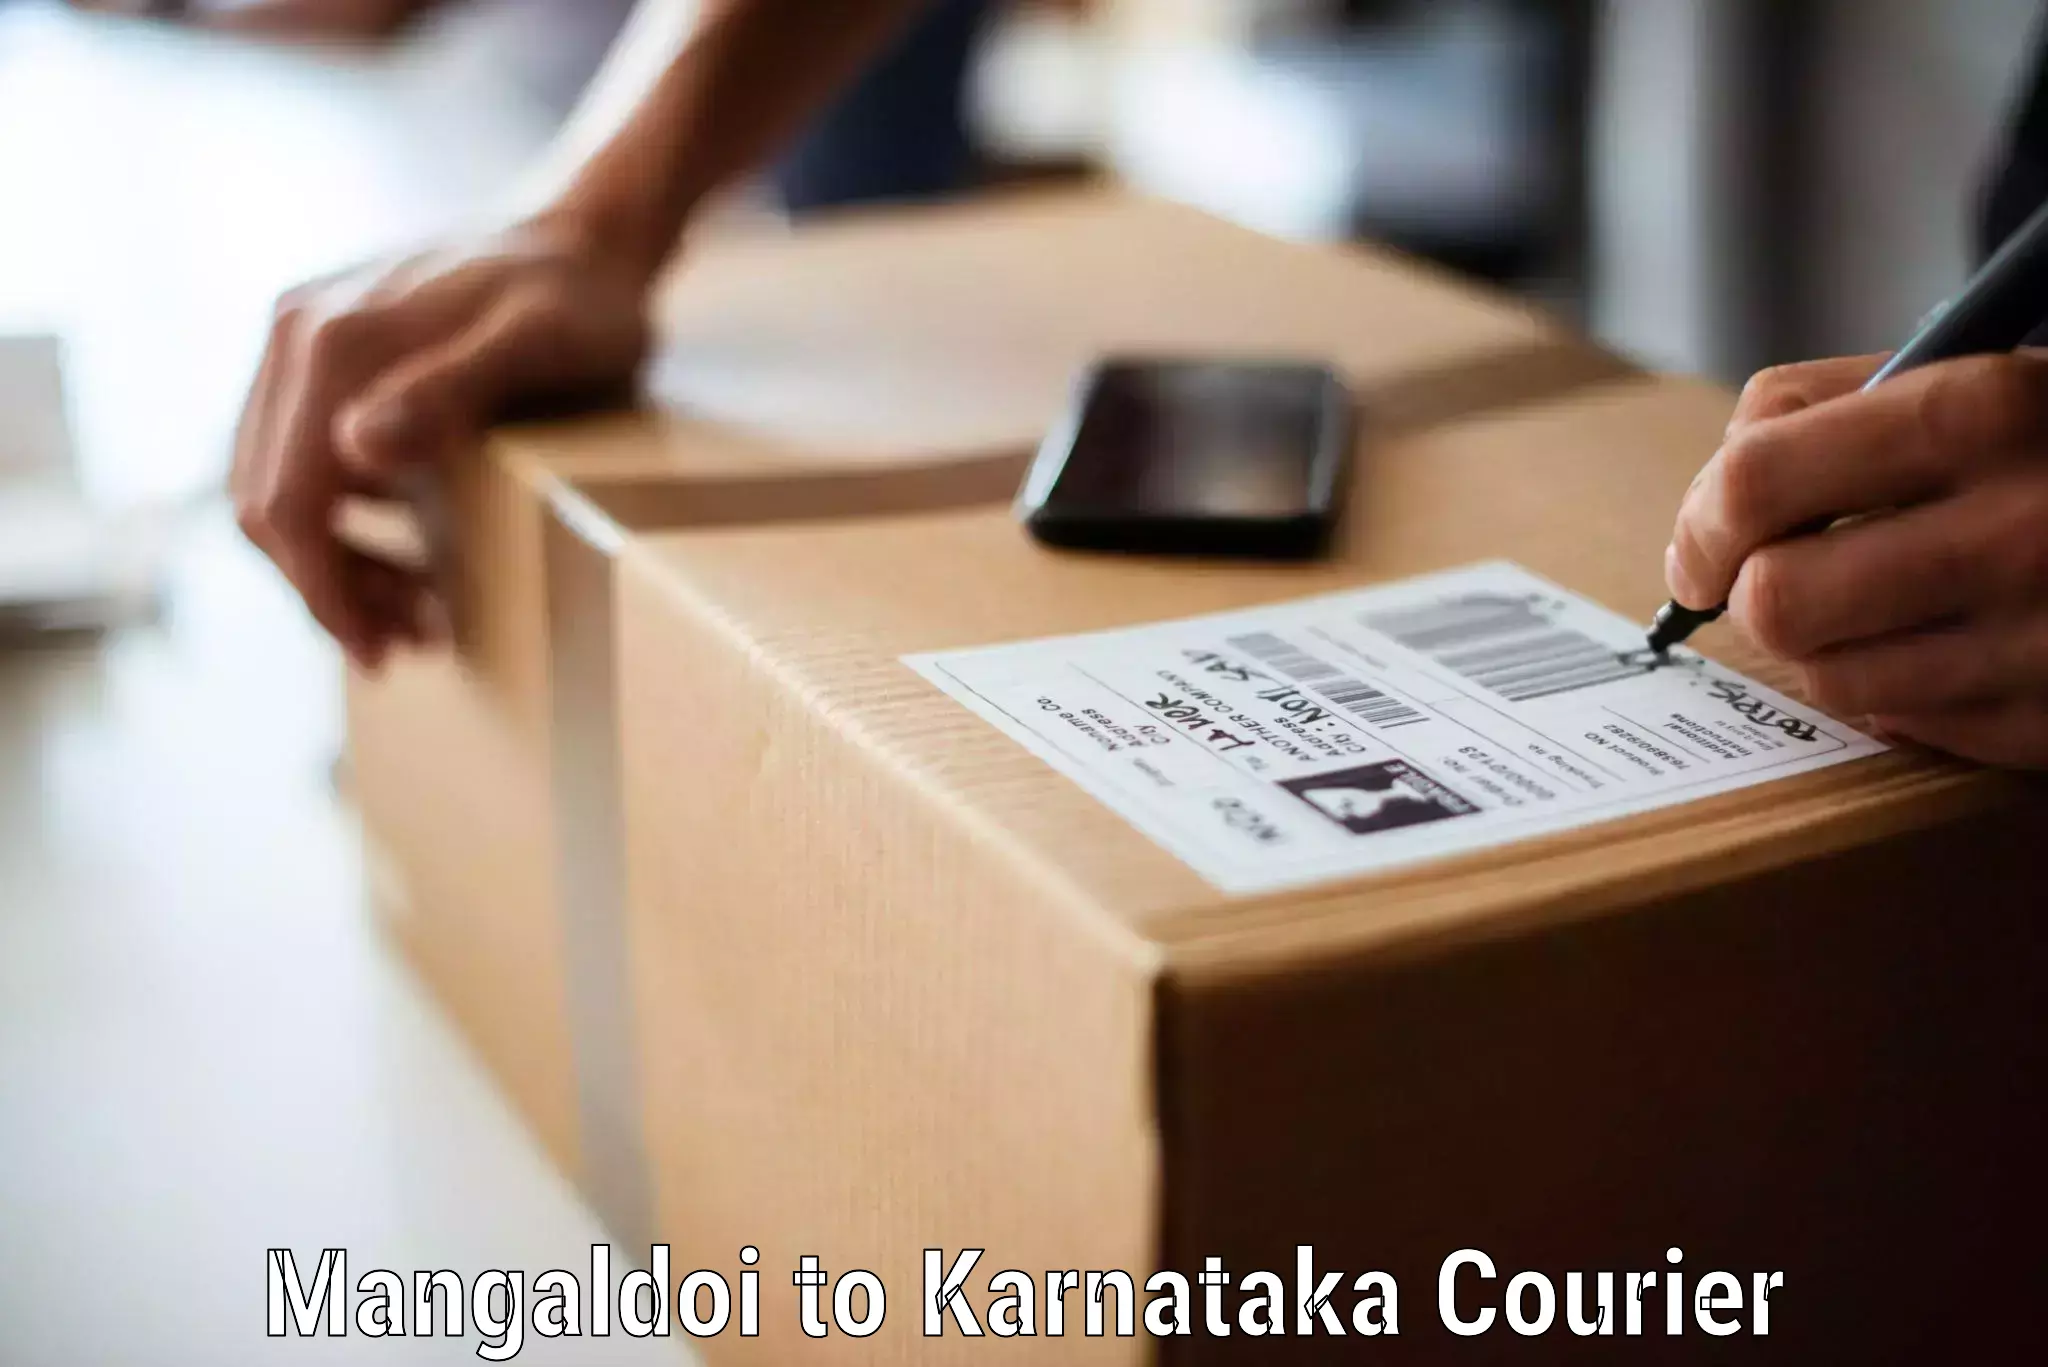 Furniture delivery service Mangaldoi to Kollegal